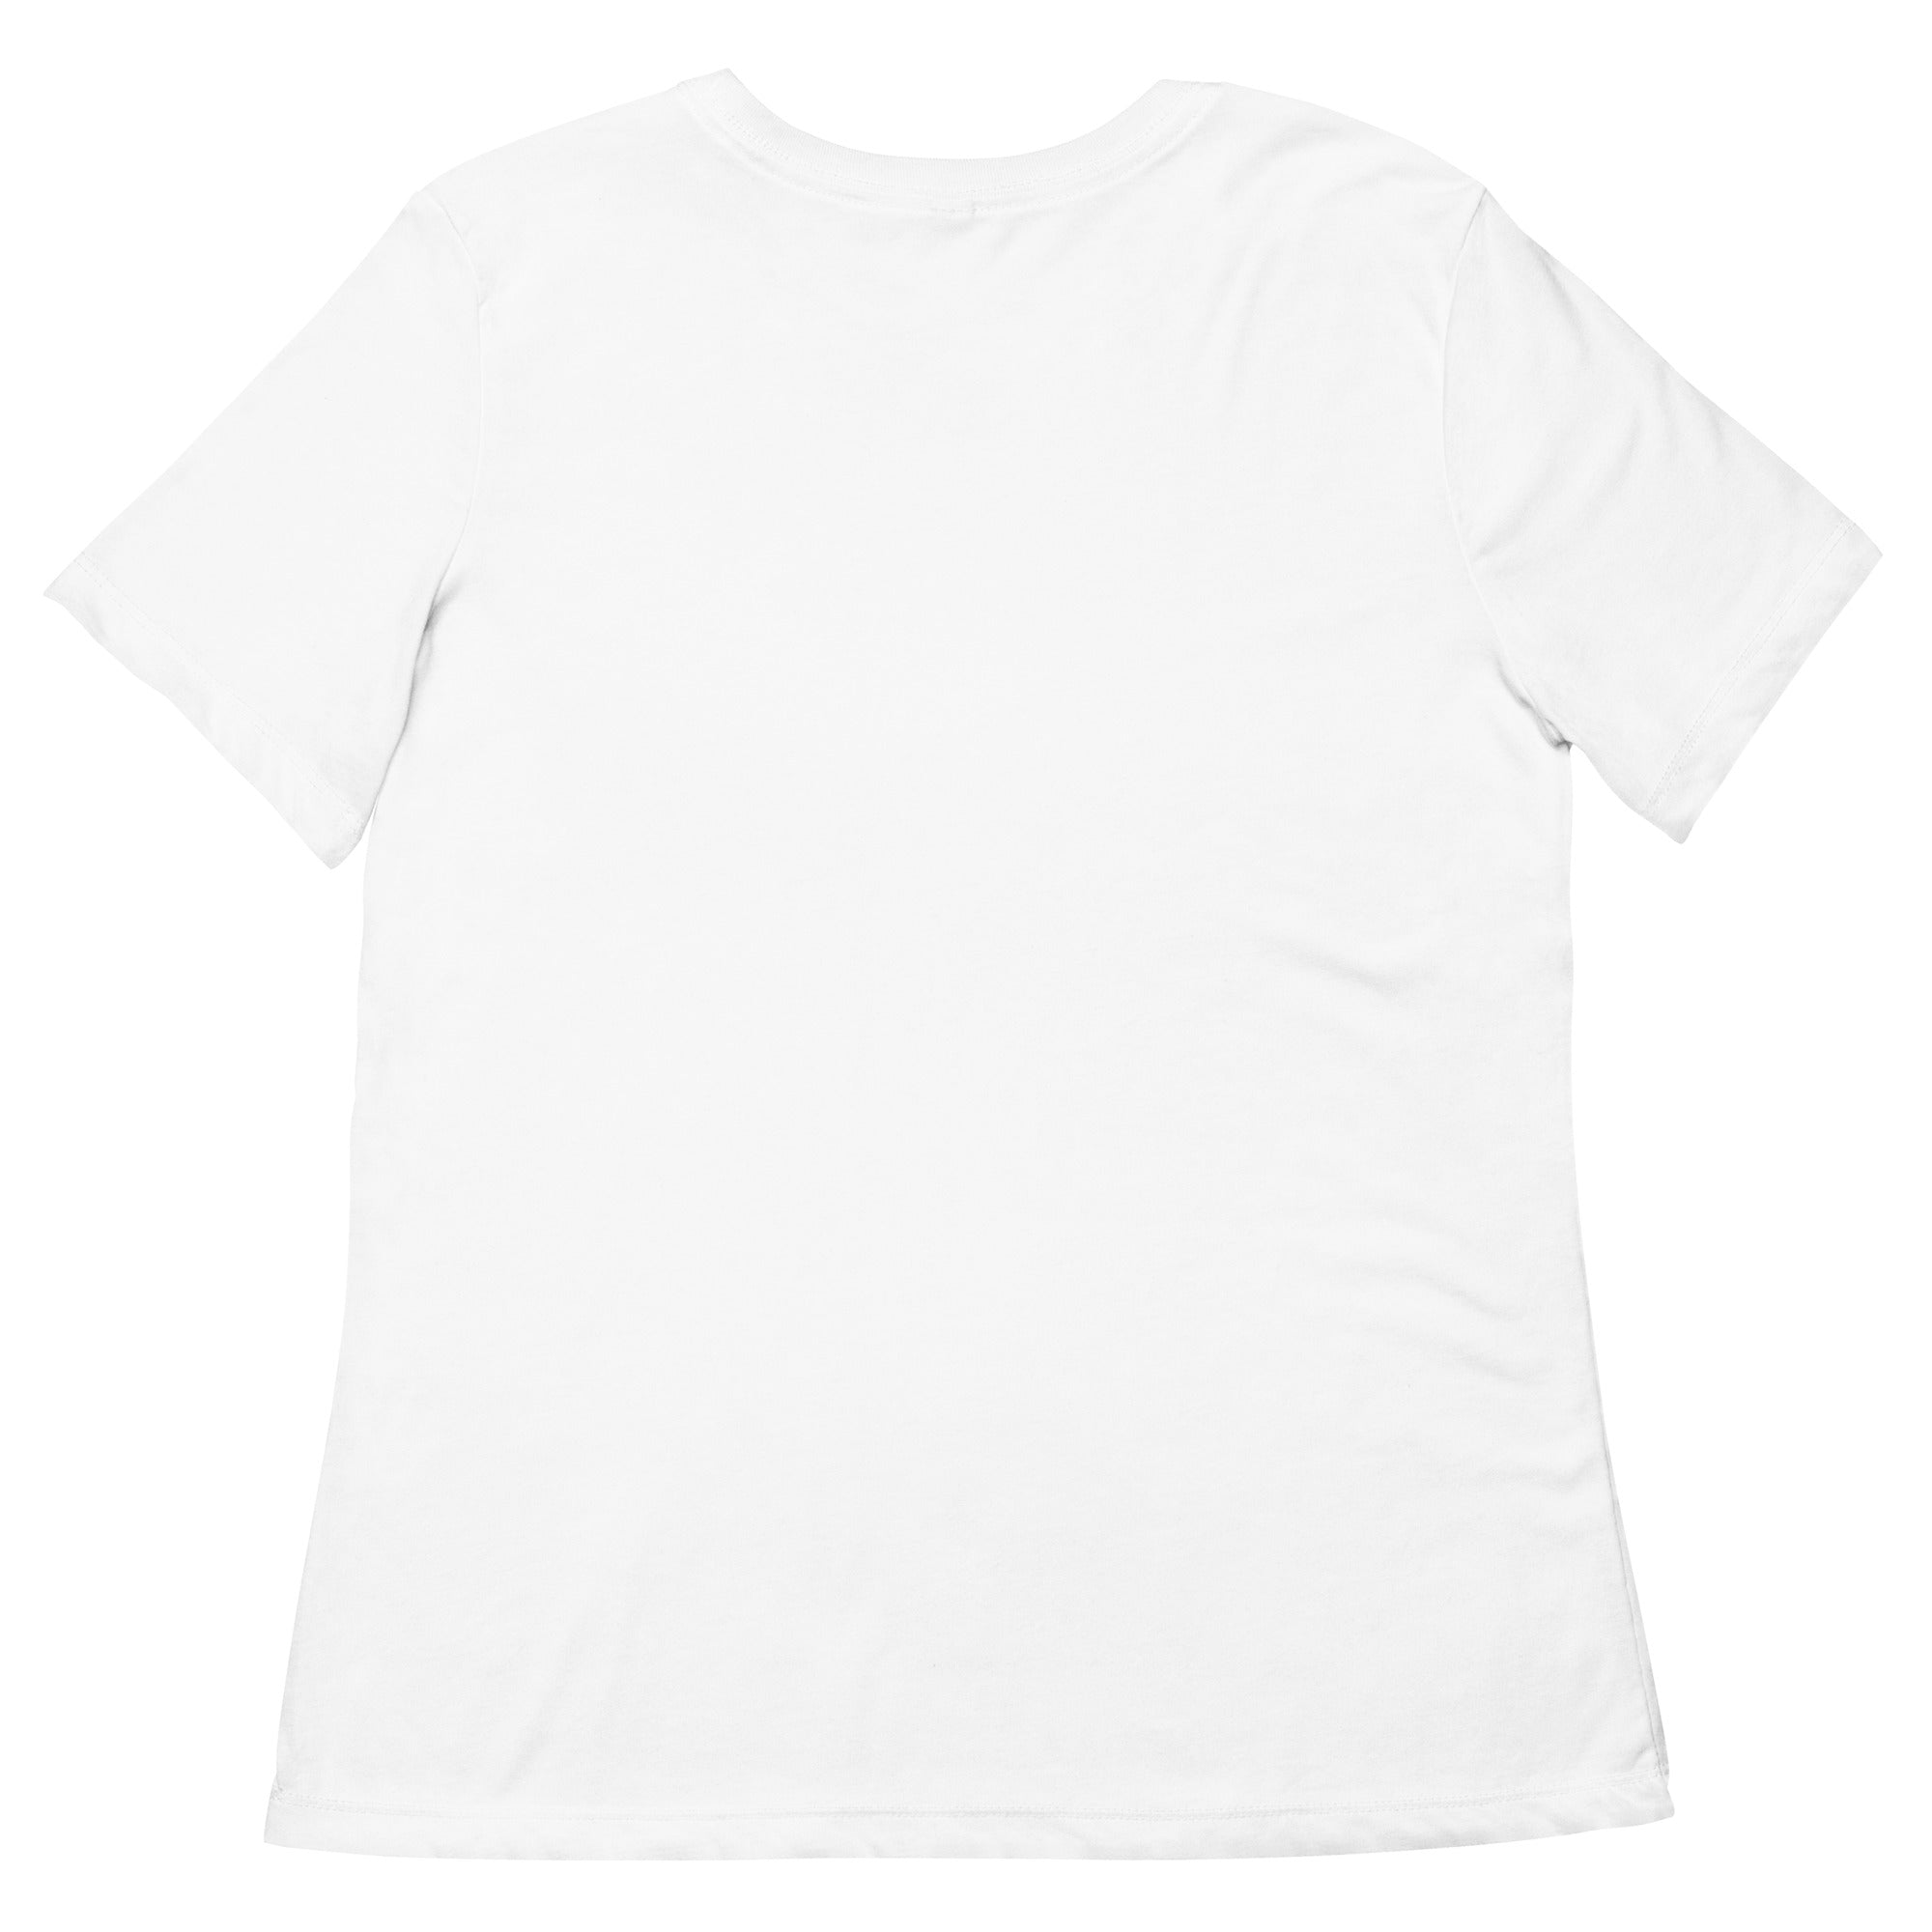 Clishirt© Embroidered White Fish Women’s relaxed tri-blend t-shirt